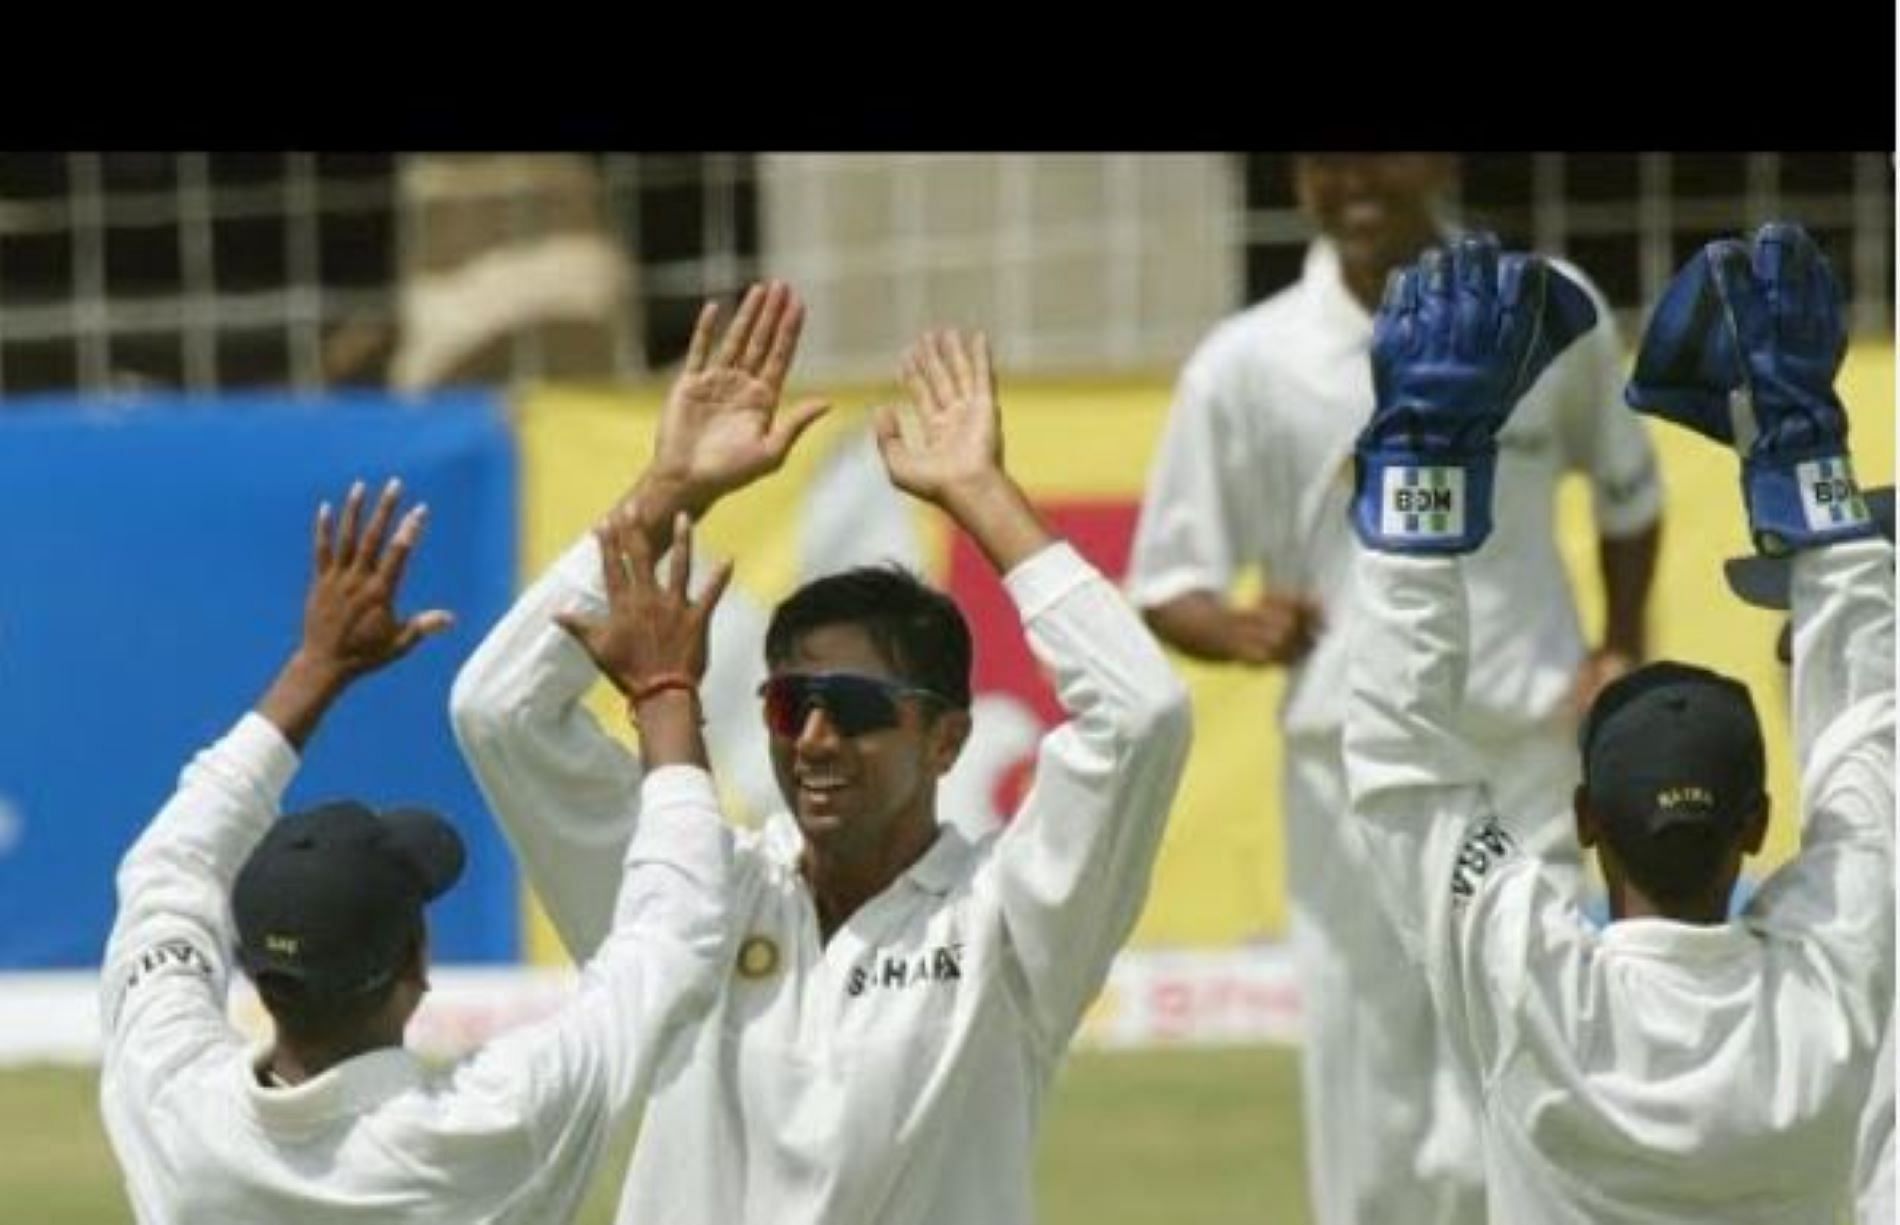 Rahul Dravid picked up his only Test wicket in the fourth Test at Antigua in 2002